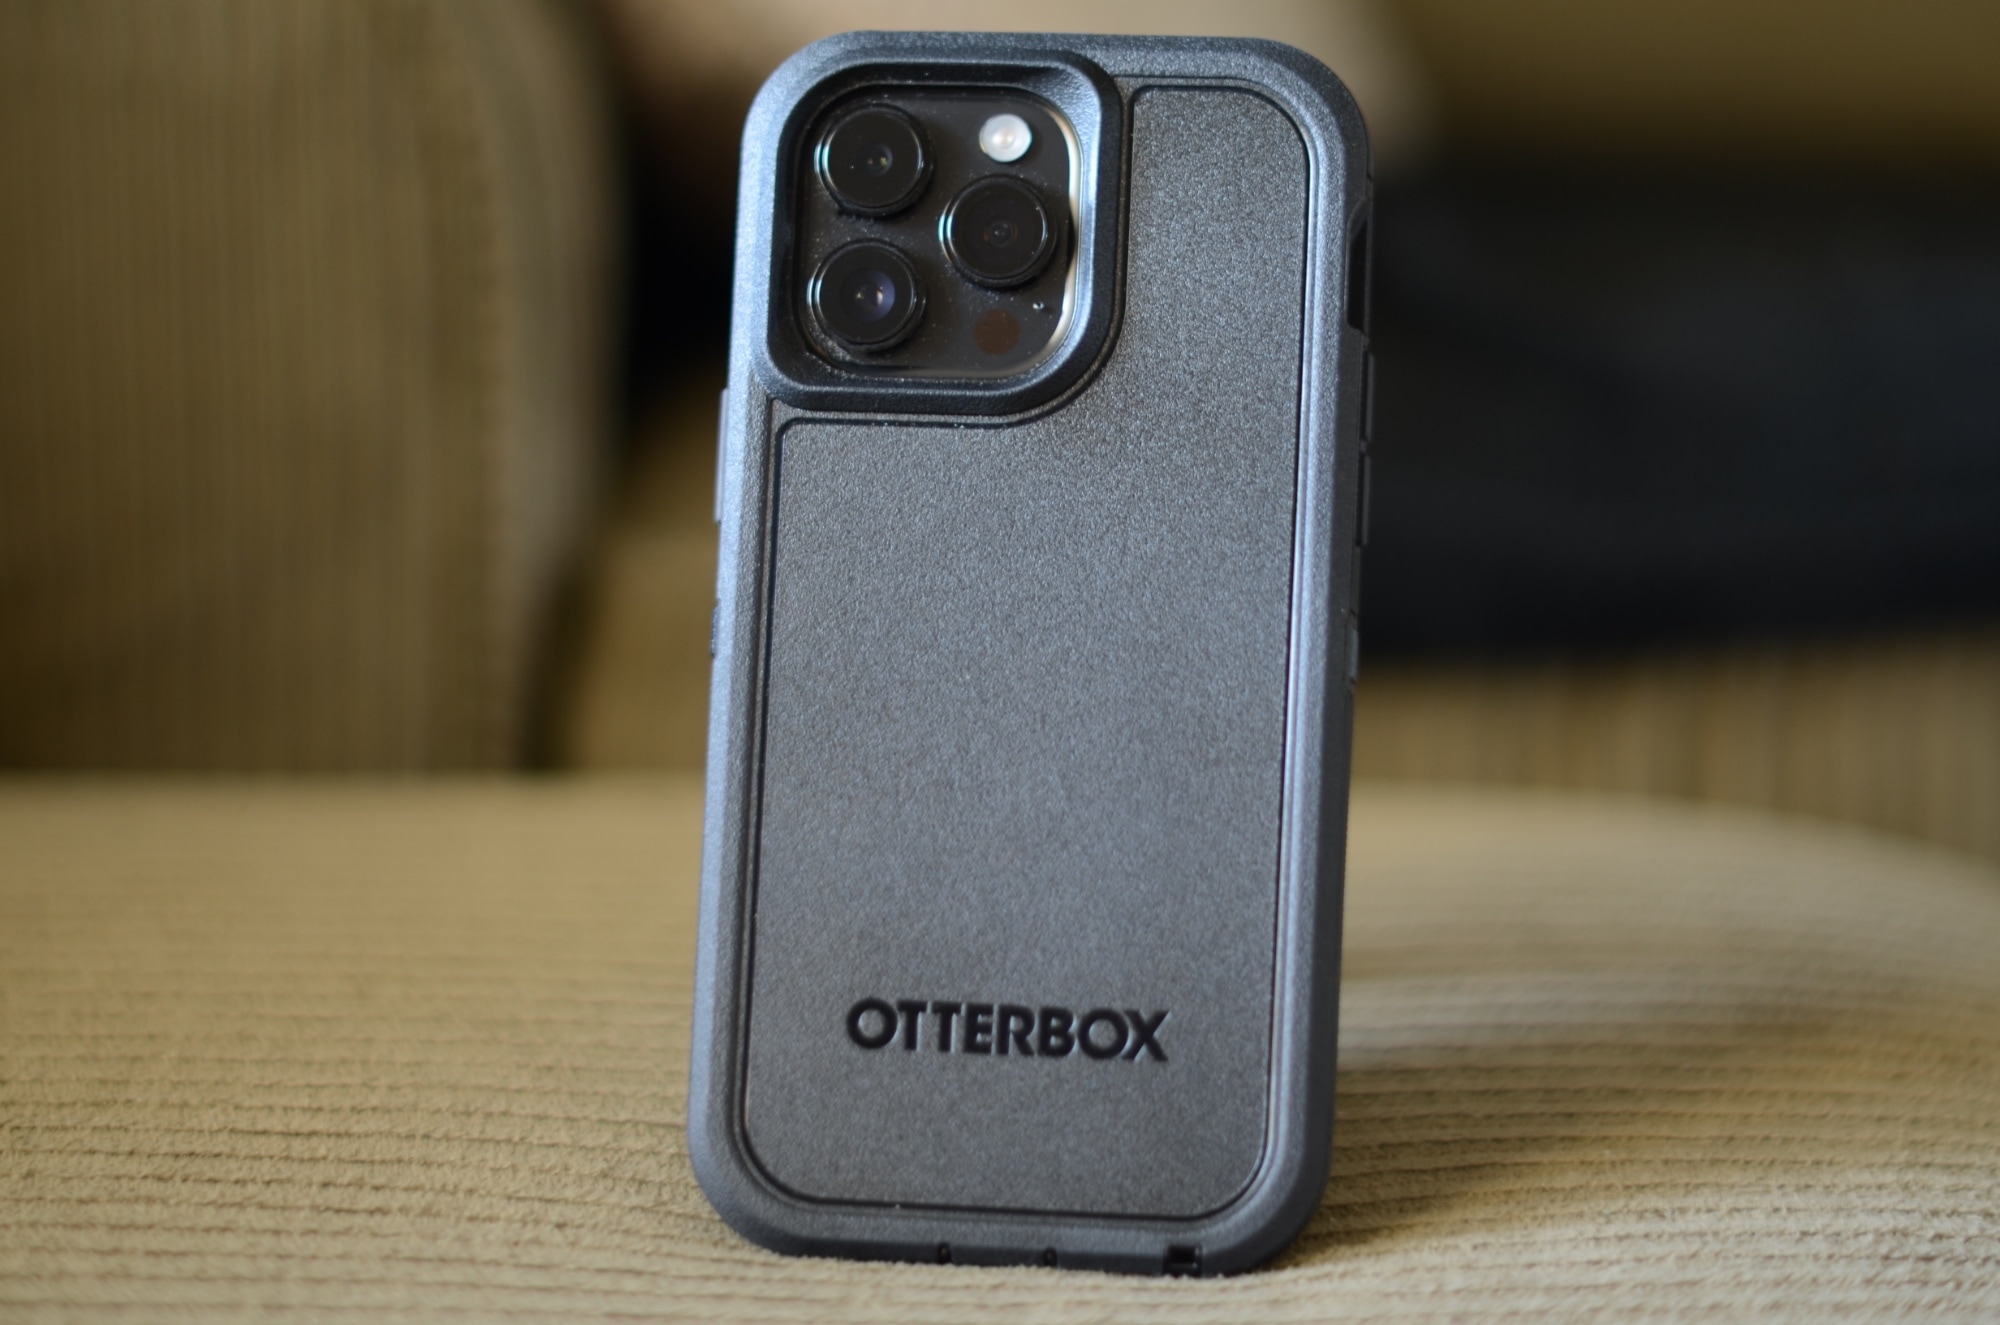 OtterBox Defender Series XT case for iPhone 14 Pro Max.